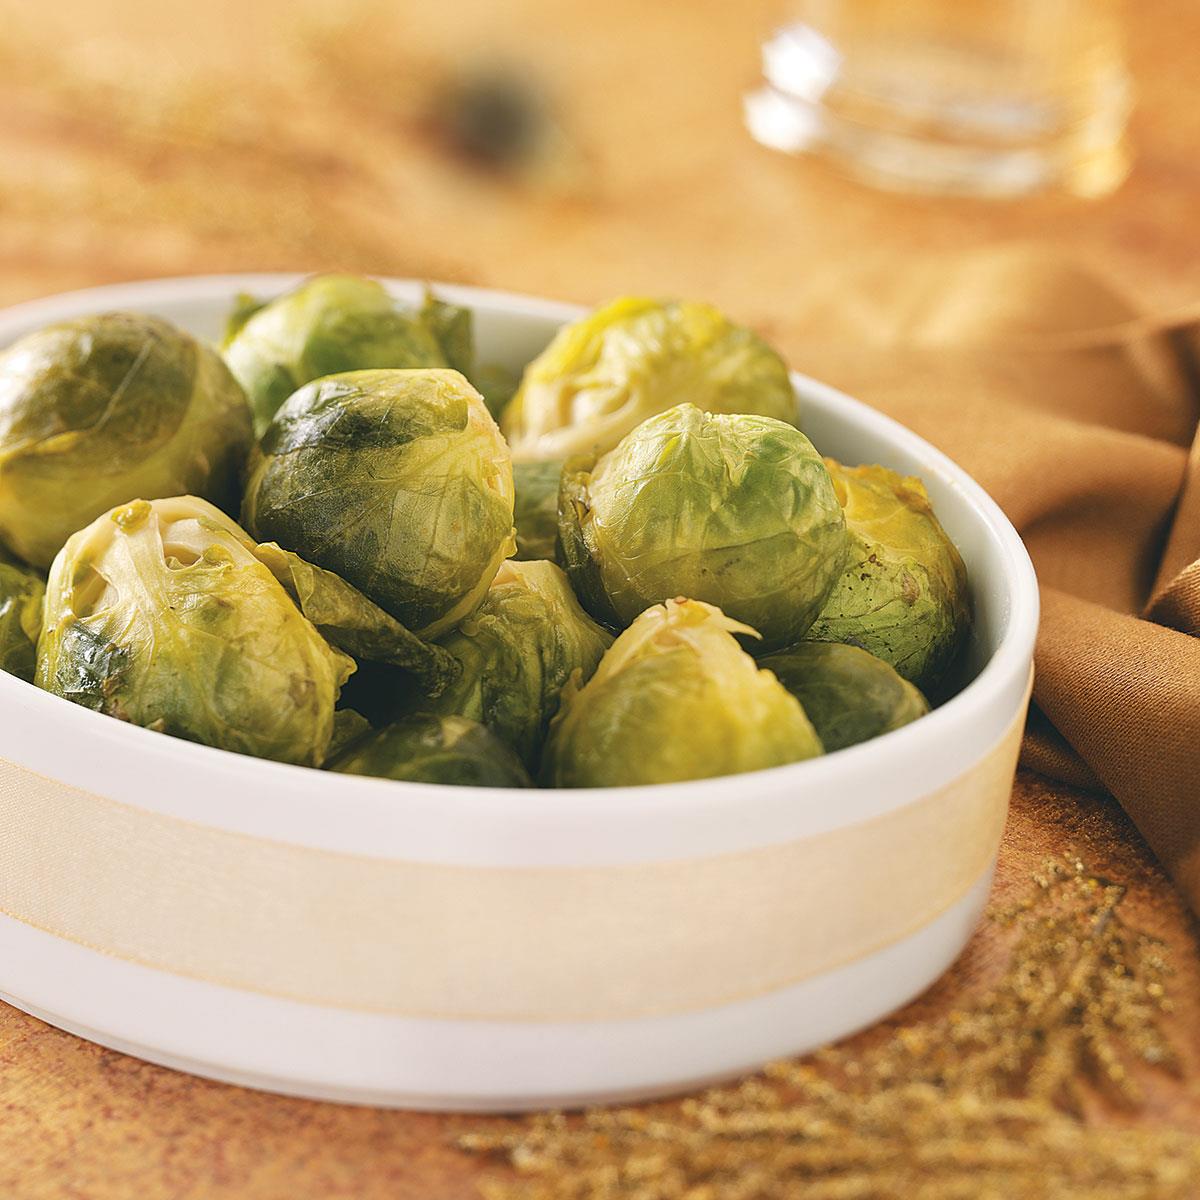 Maple-Dijon Glazed Brussels Sprouts_image